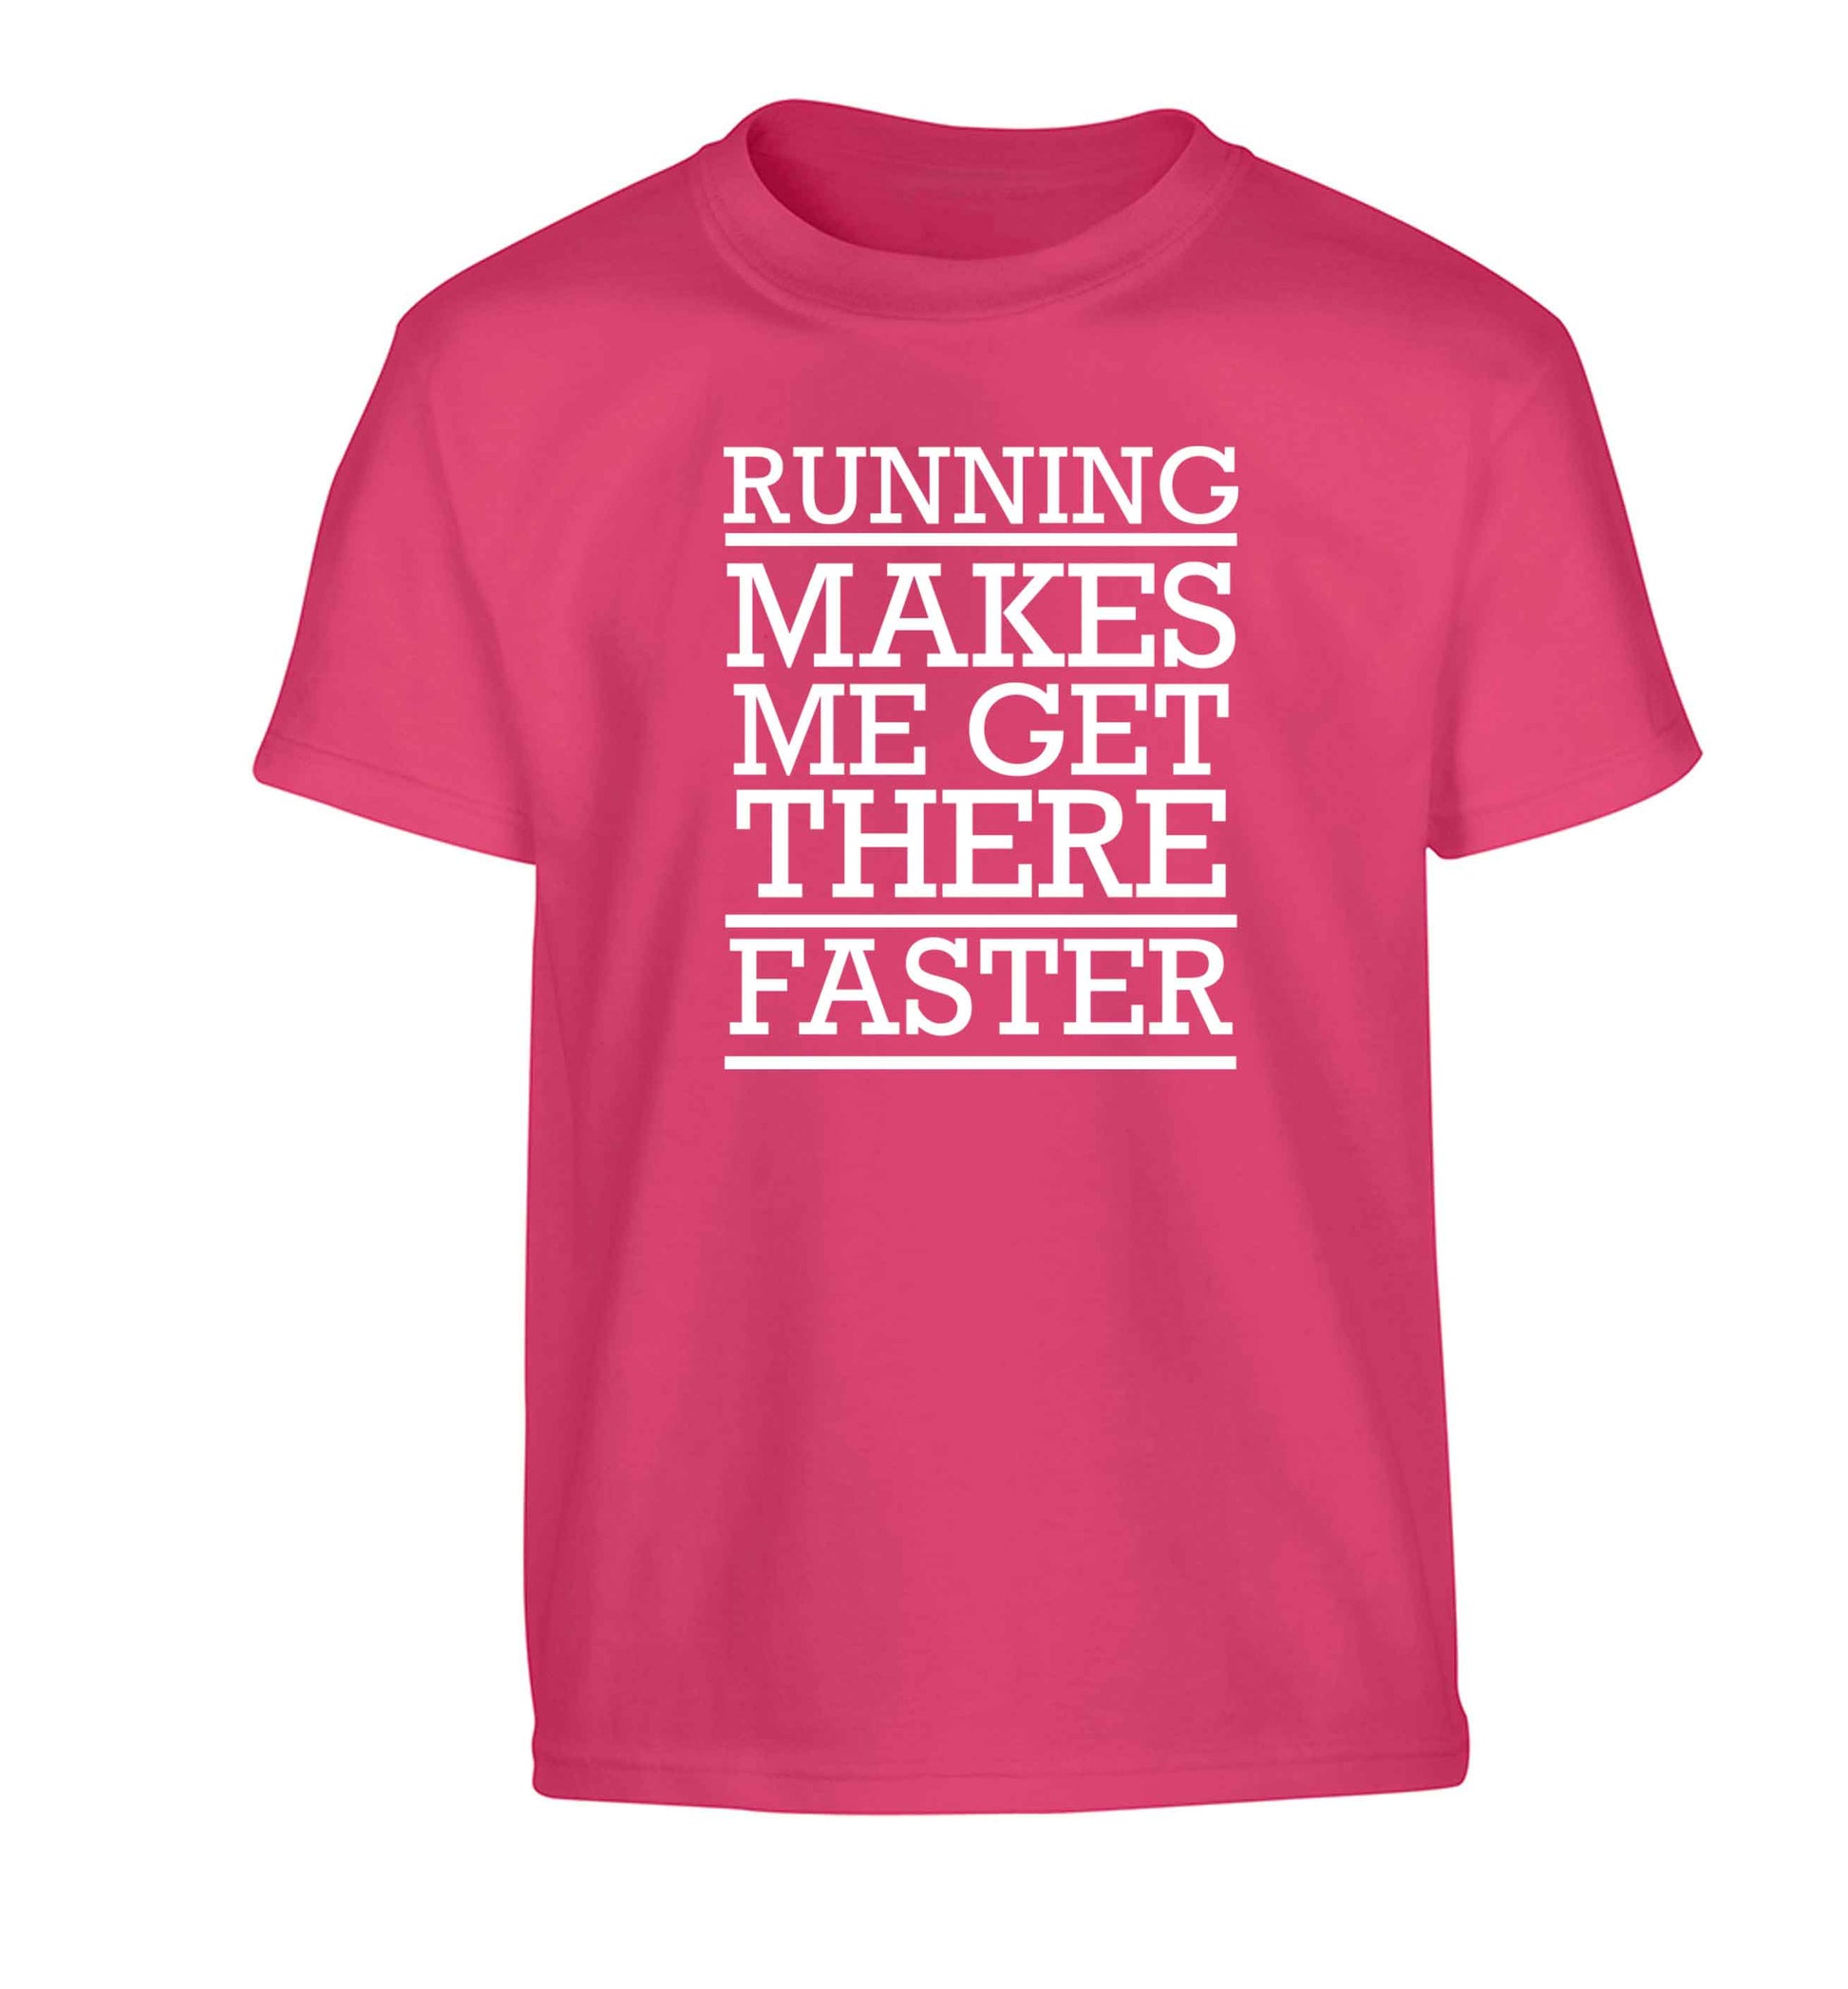 Running makes me get there faster Children's pink Tshirt 12-13 Years